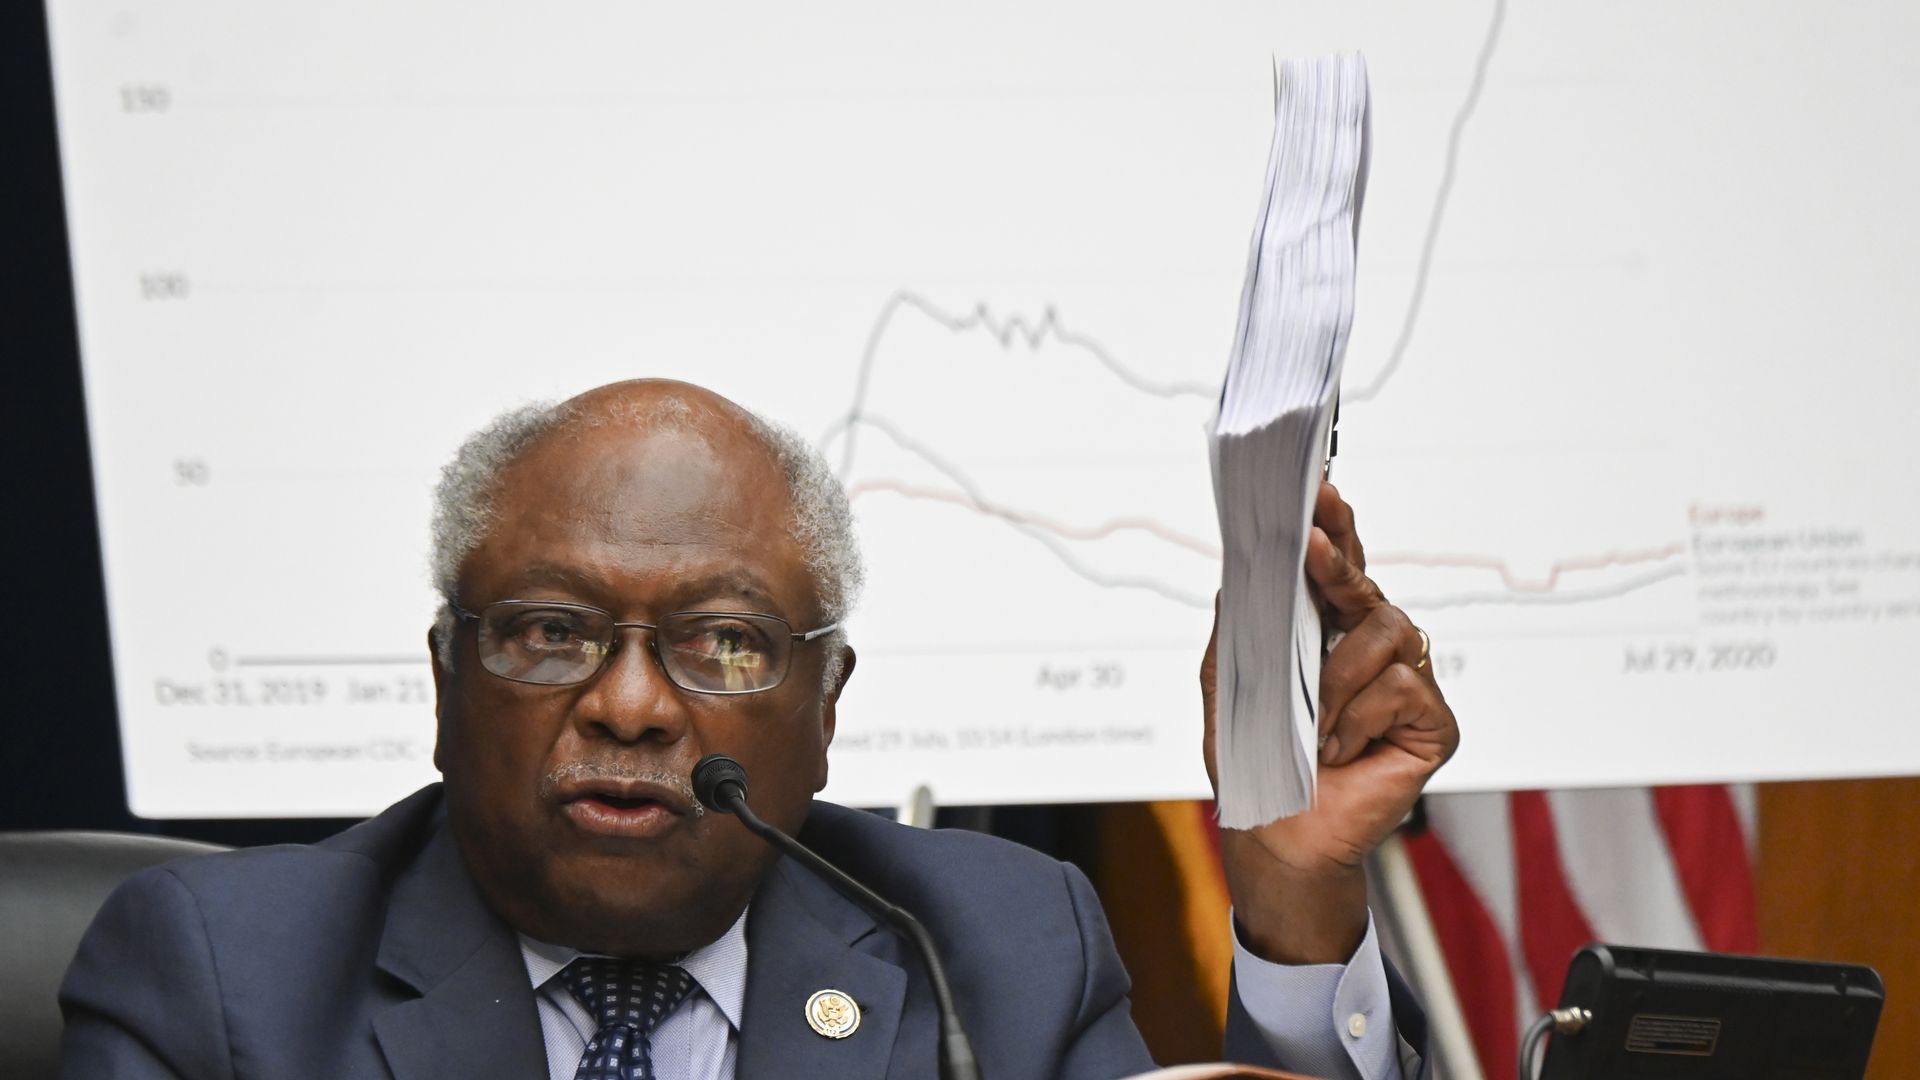 Clyburn holds a stack of papers in front of a line chart